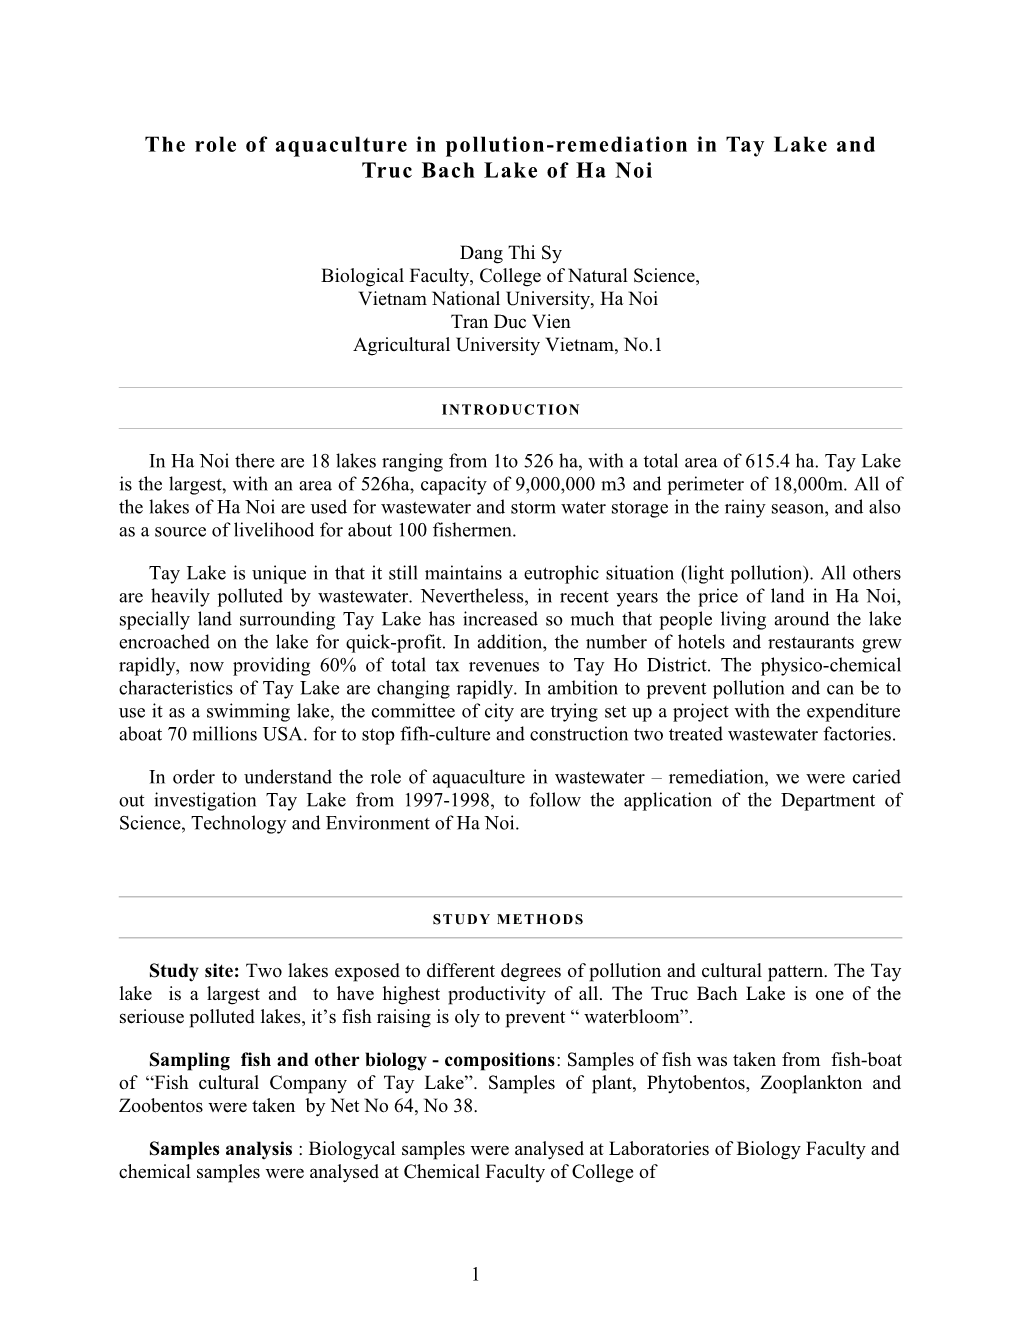 The Role of Aquaculture in Pollution-Remediation in Tay Lake and Truc Bach Lake of Ha Noi